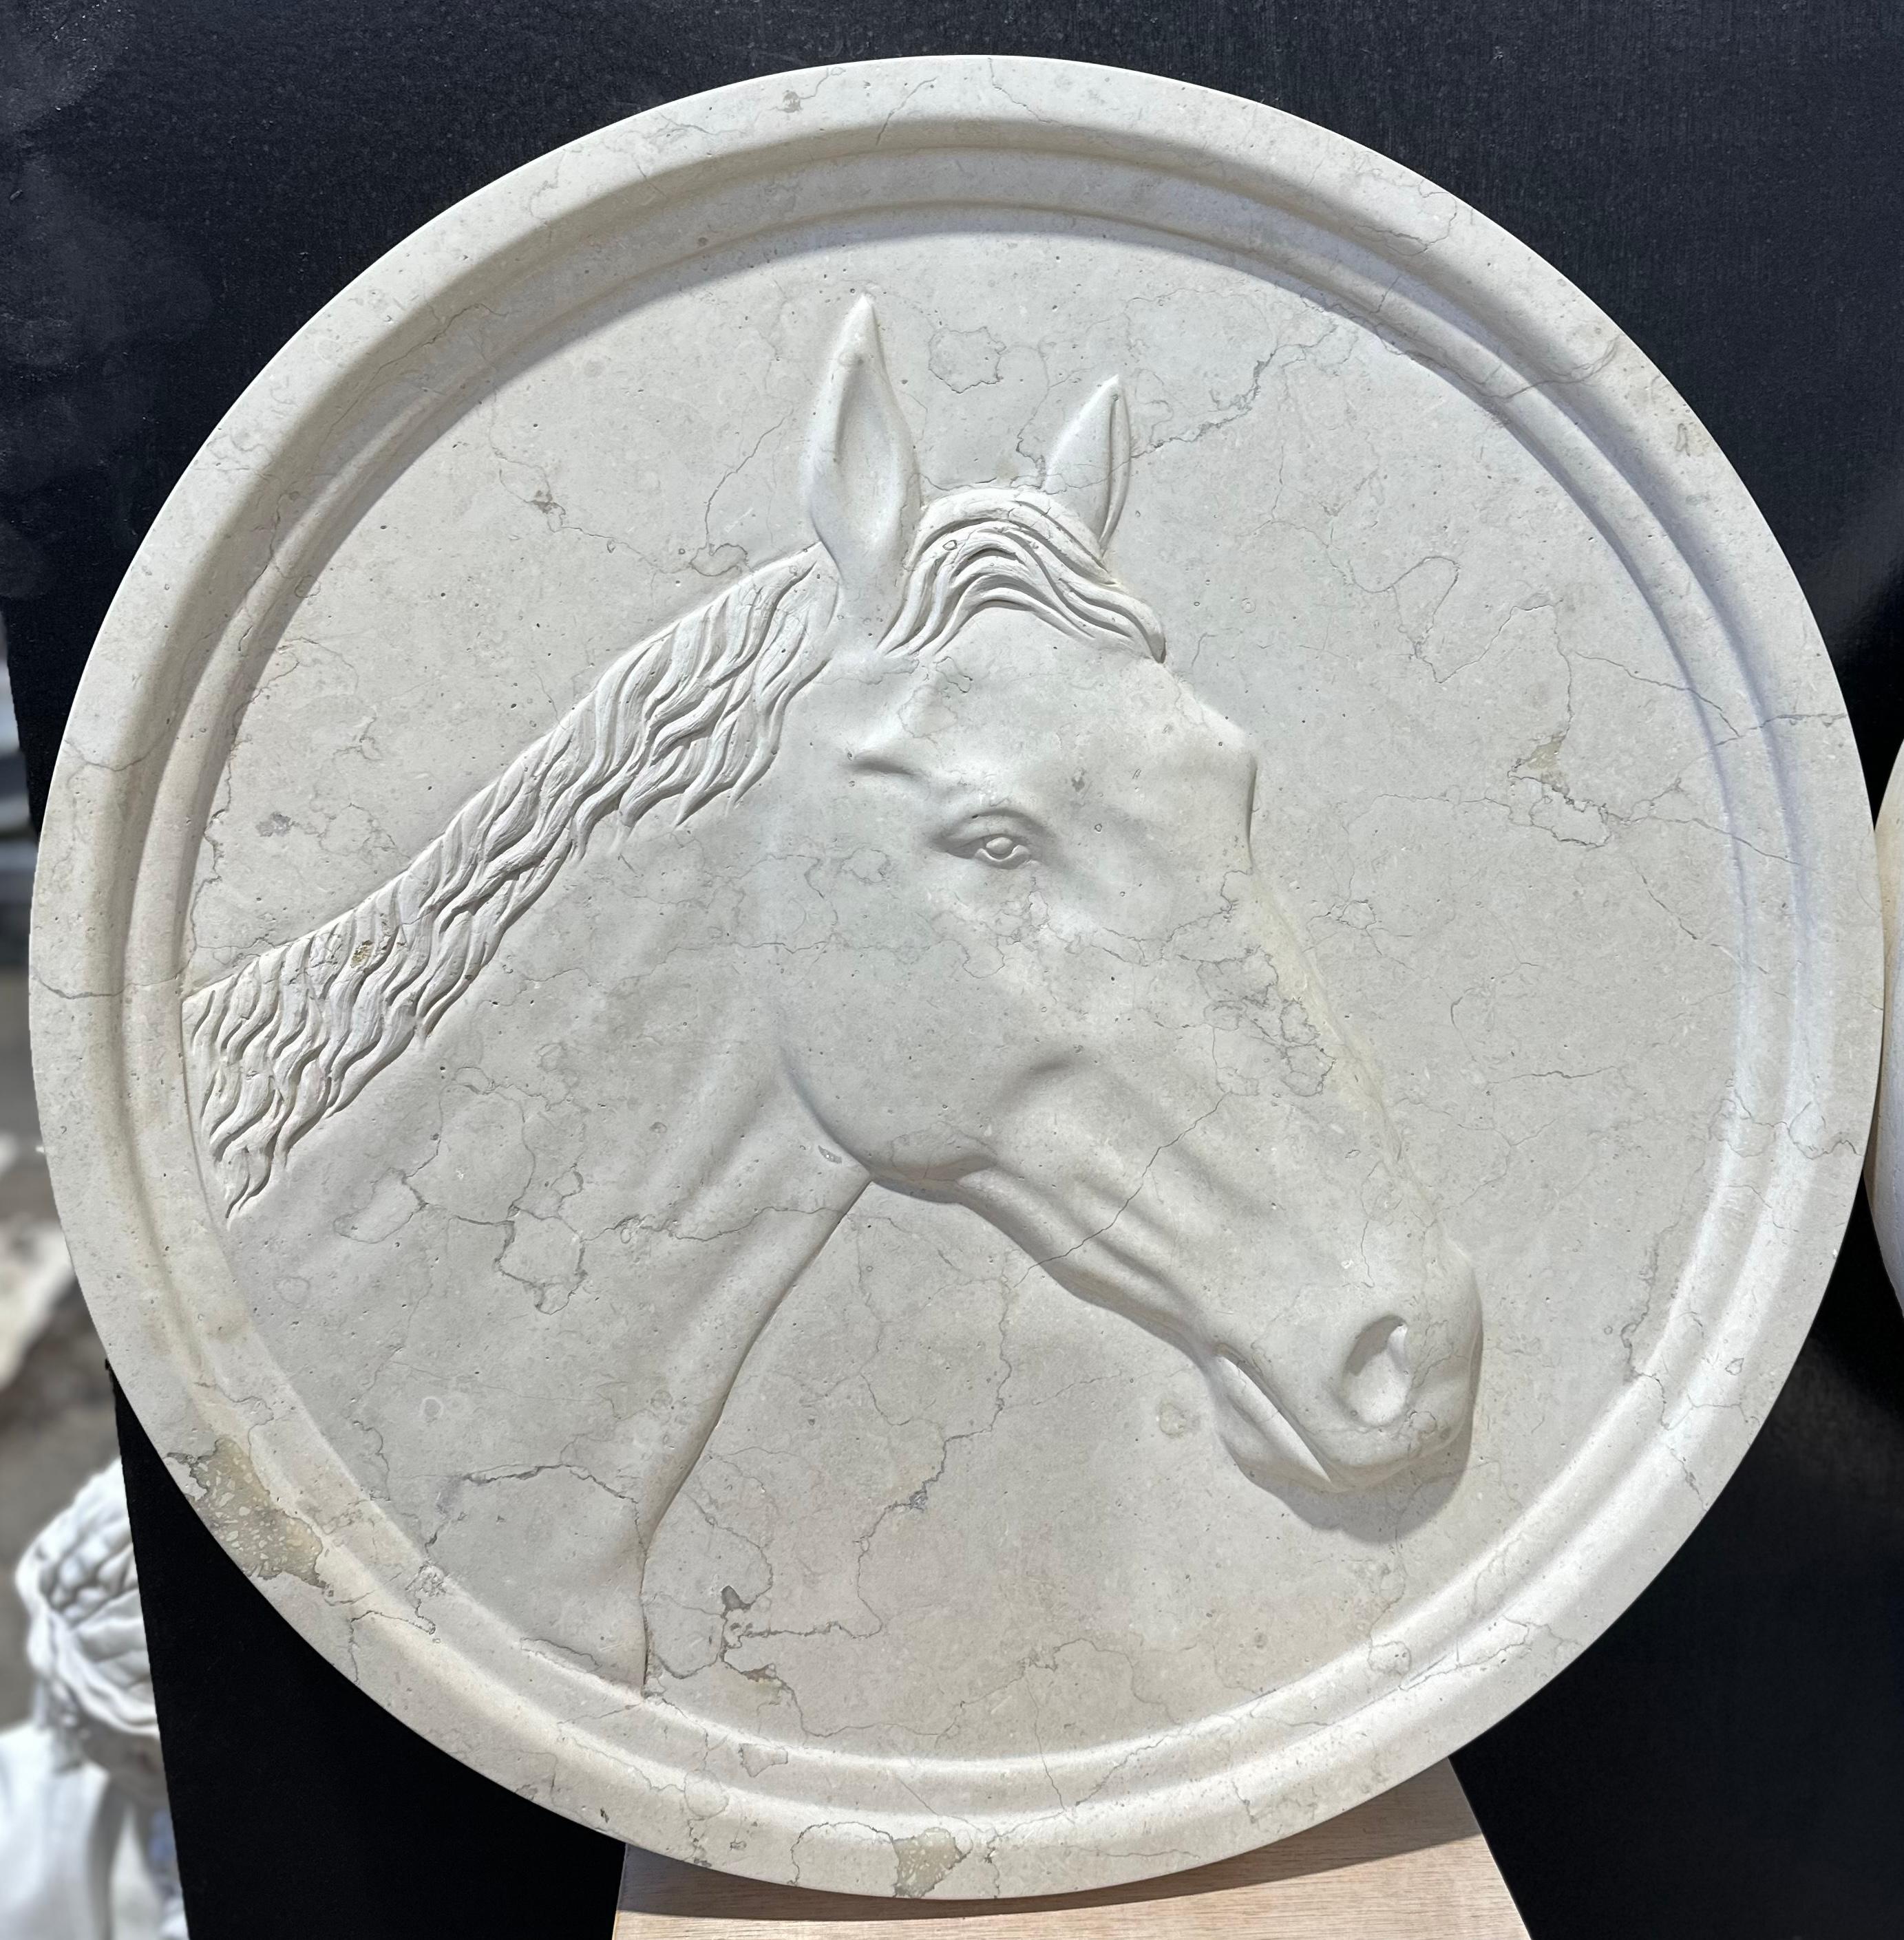 A beautifully hand carved pair of horse head marble wall plaques, one with a bridle. These are a lovely set with crisp carving to the horses head, detailing the bone structure and muscles. These would make a wonderful addition to any equestrian